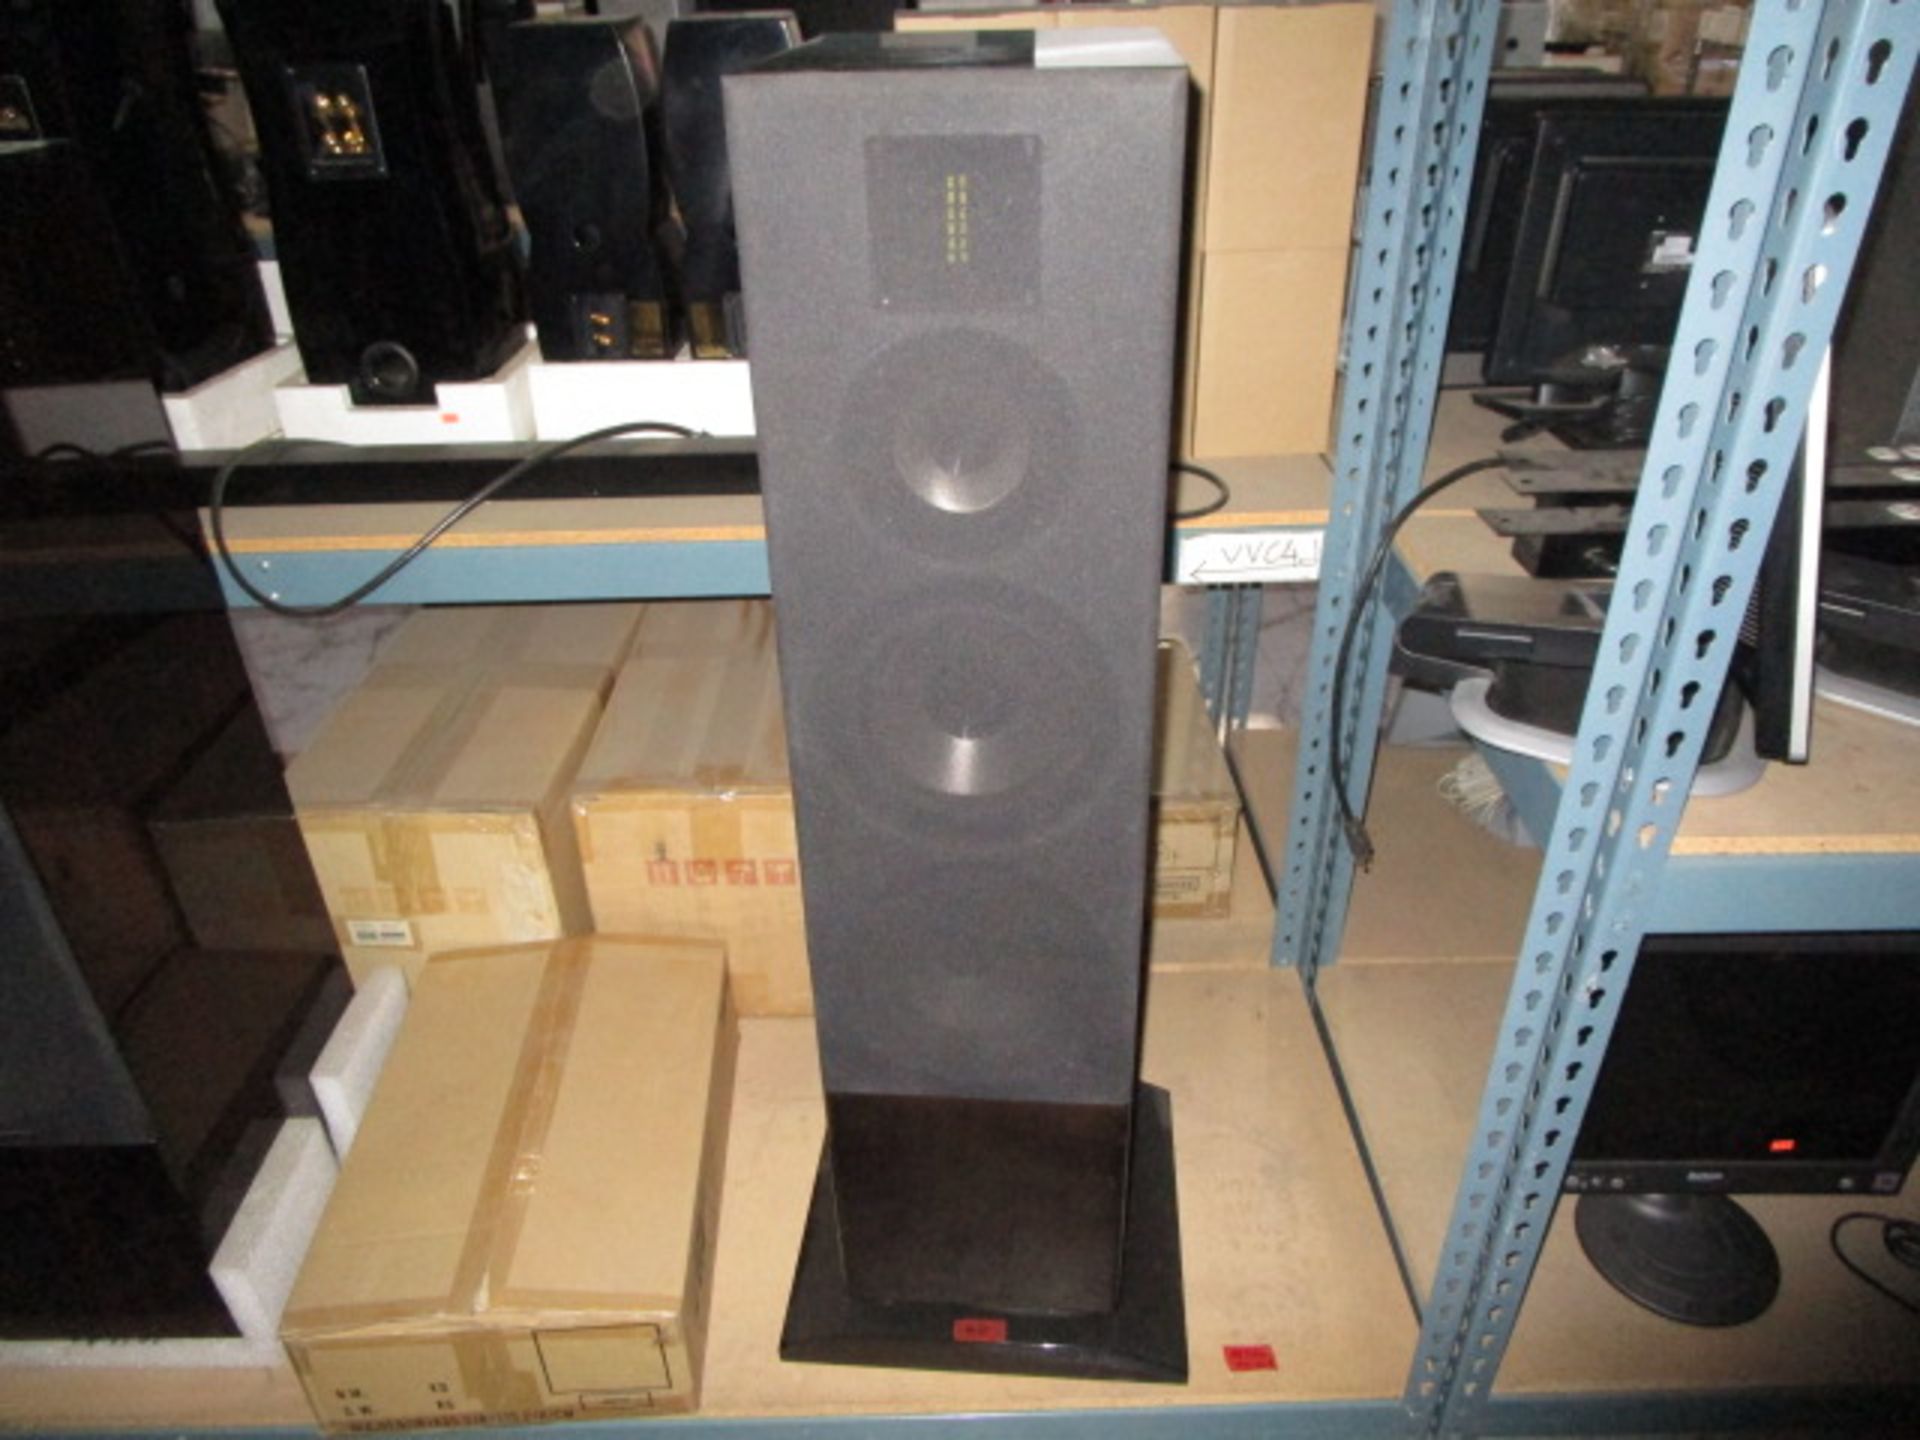 SHELVING UNIT OF RECEIVER SYSTEMS AND SPEAKERS - Image 6 of 8